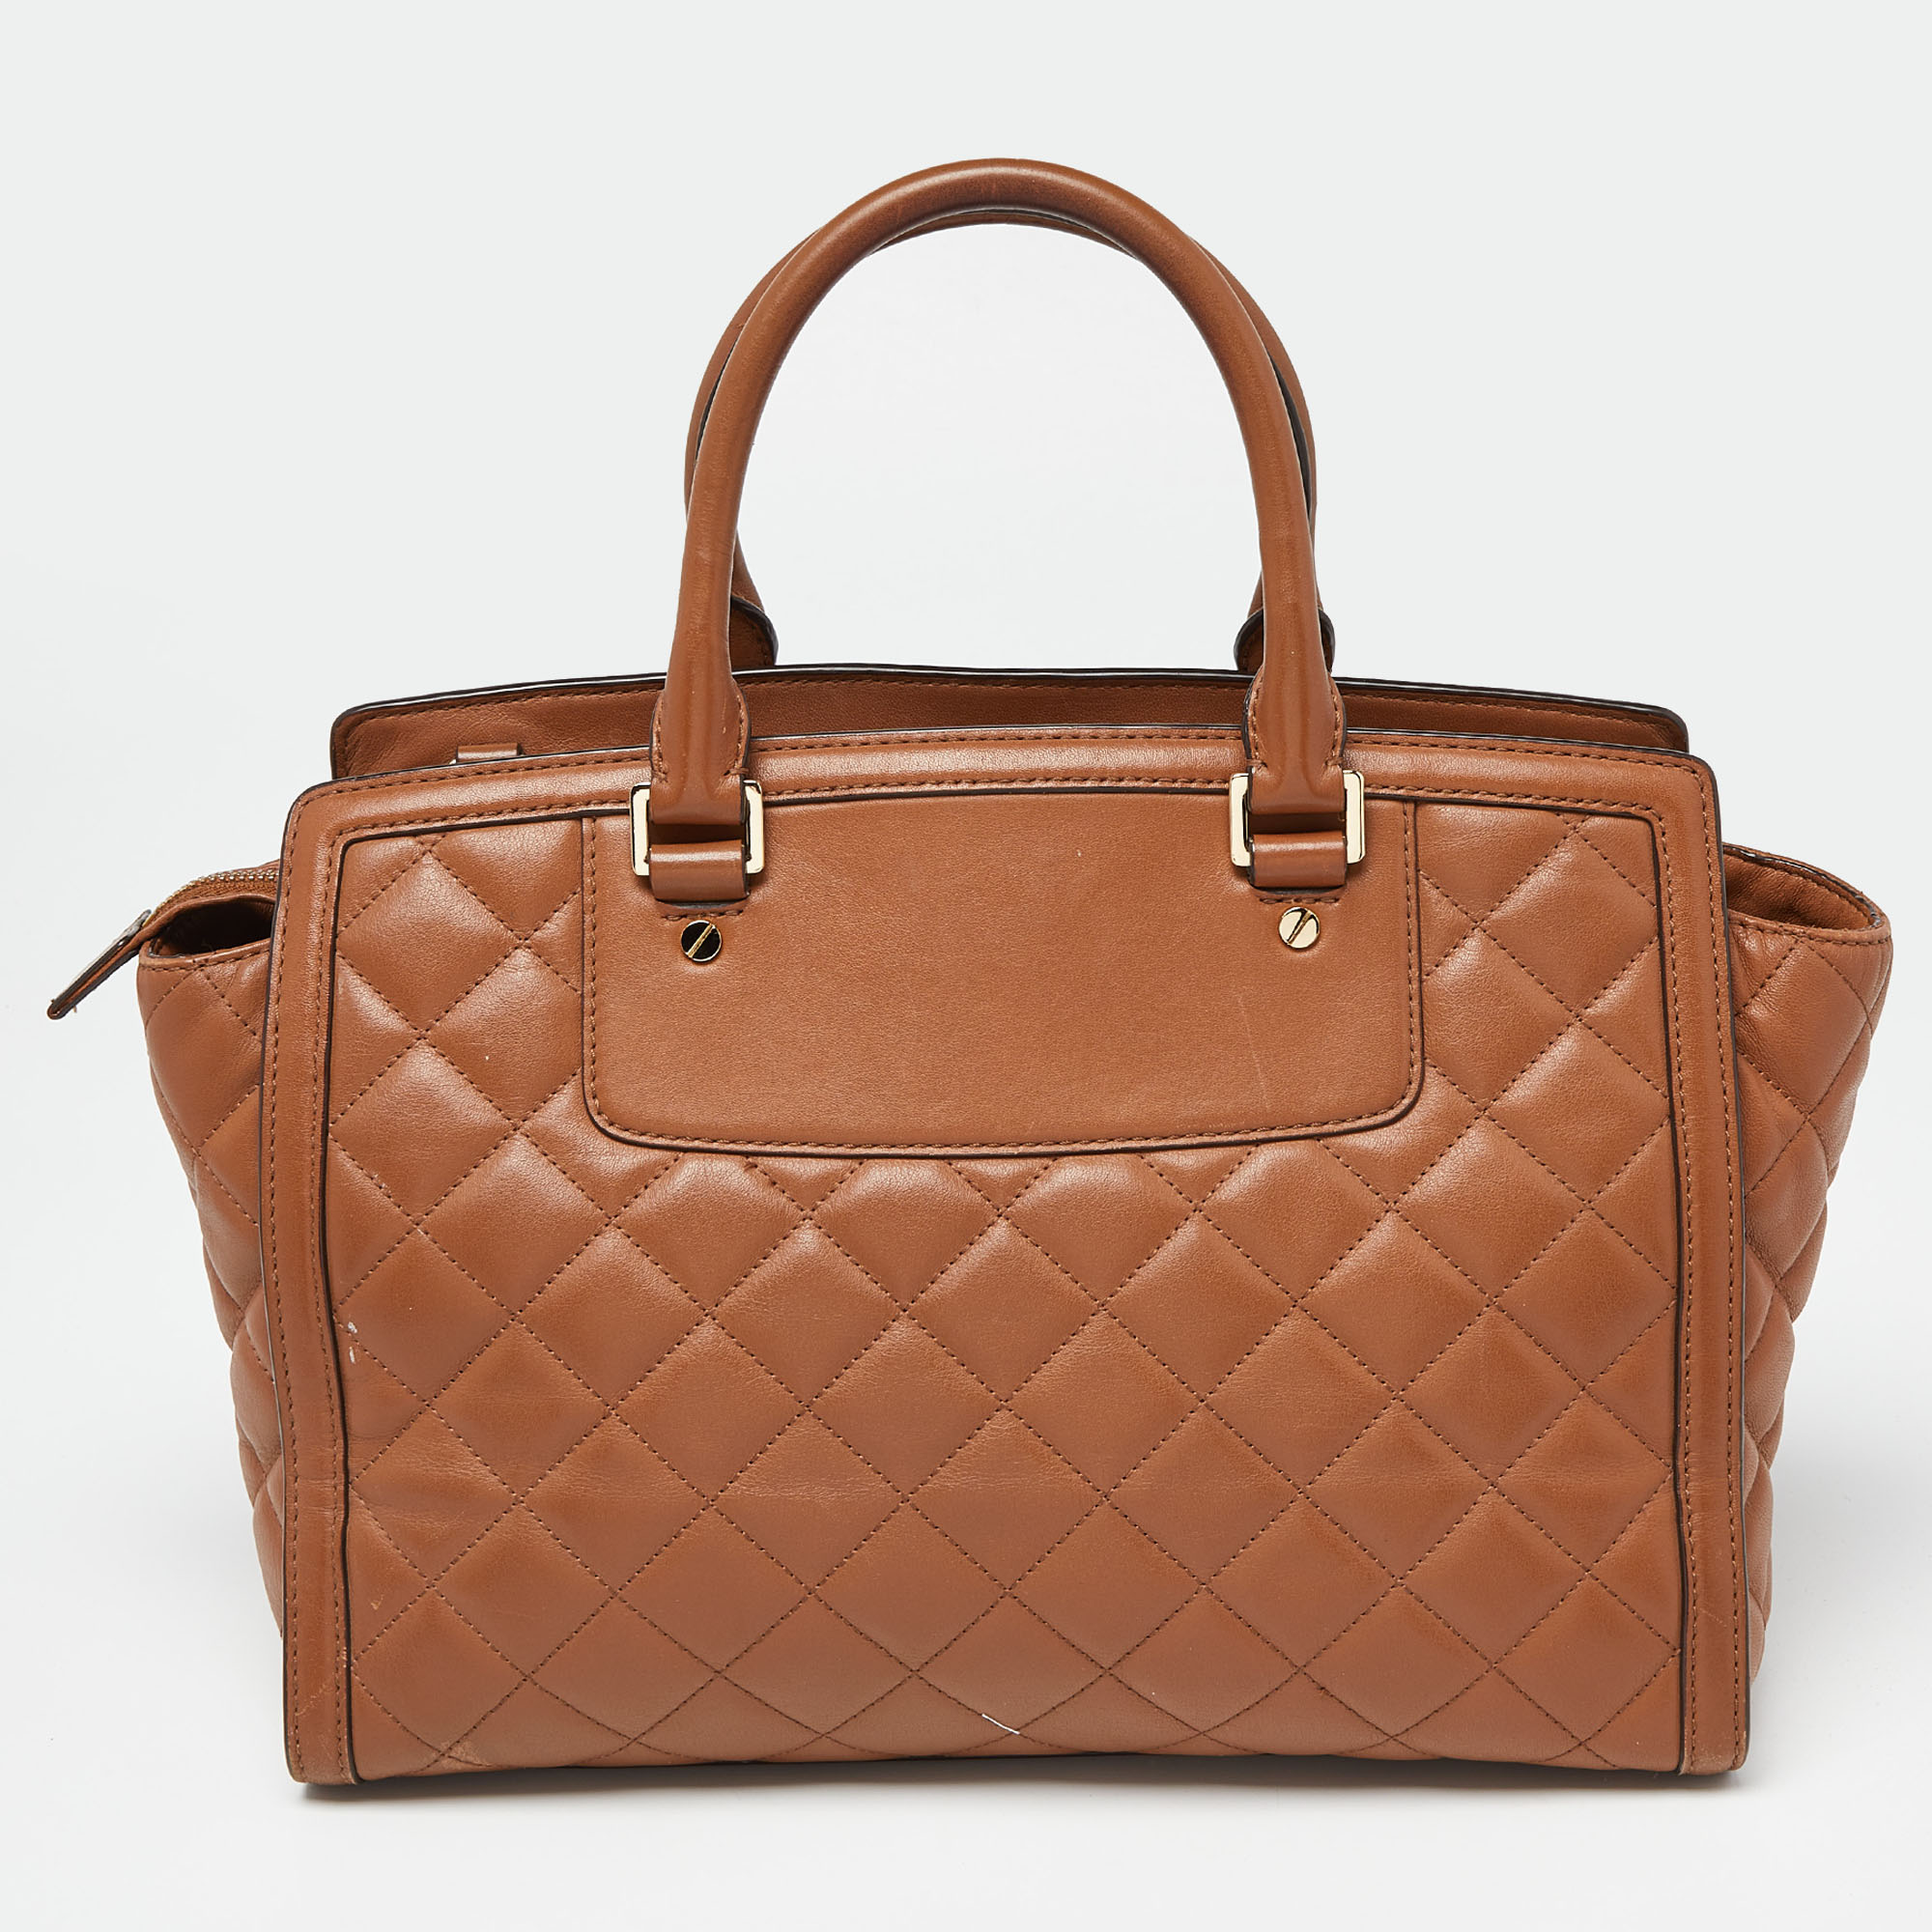 MICHAEL Michael Kors Brown Quilted Leather Selma Satchel